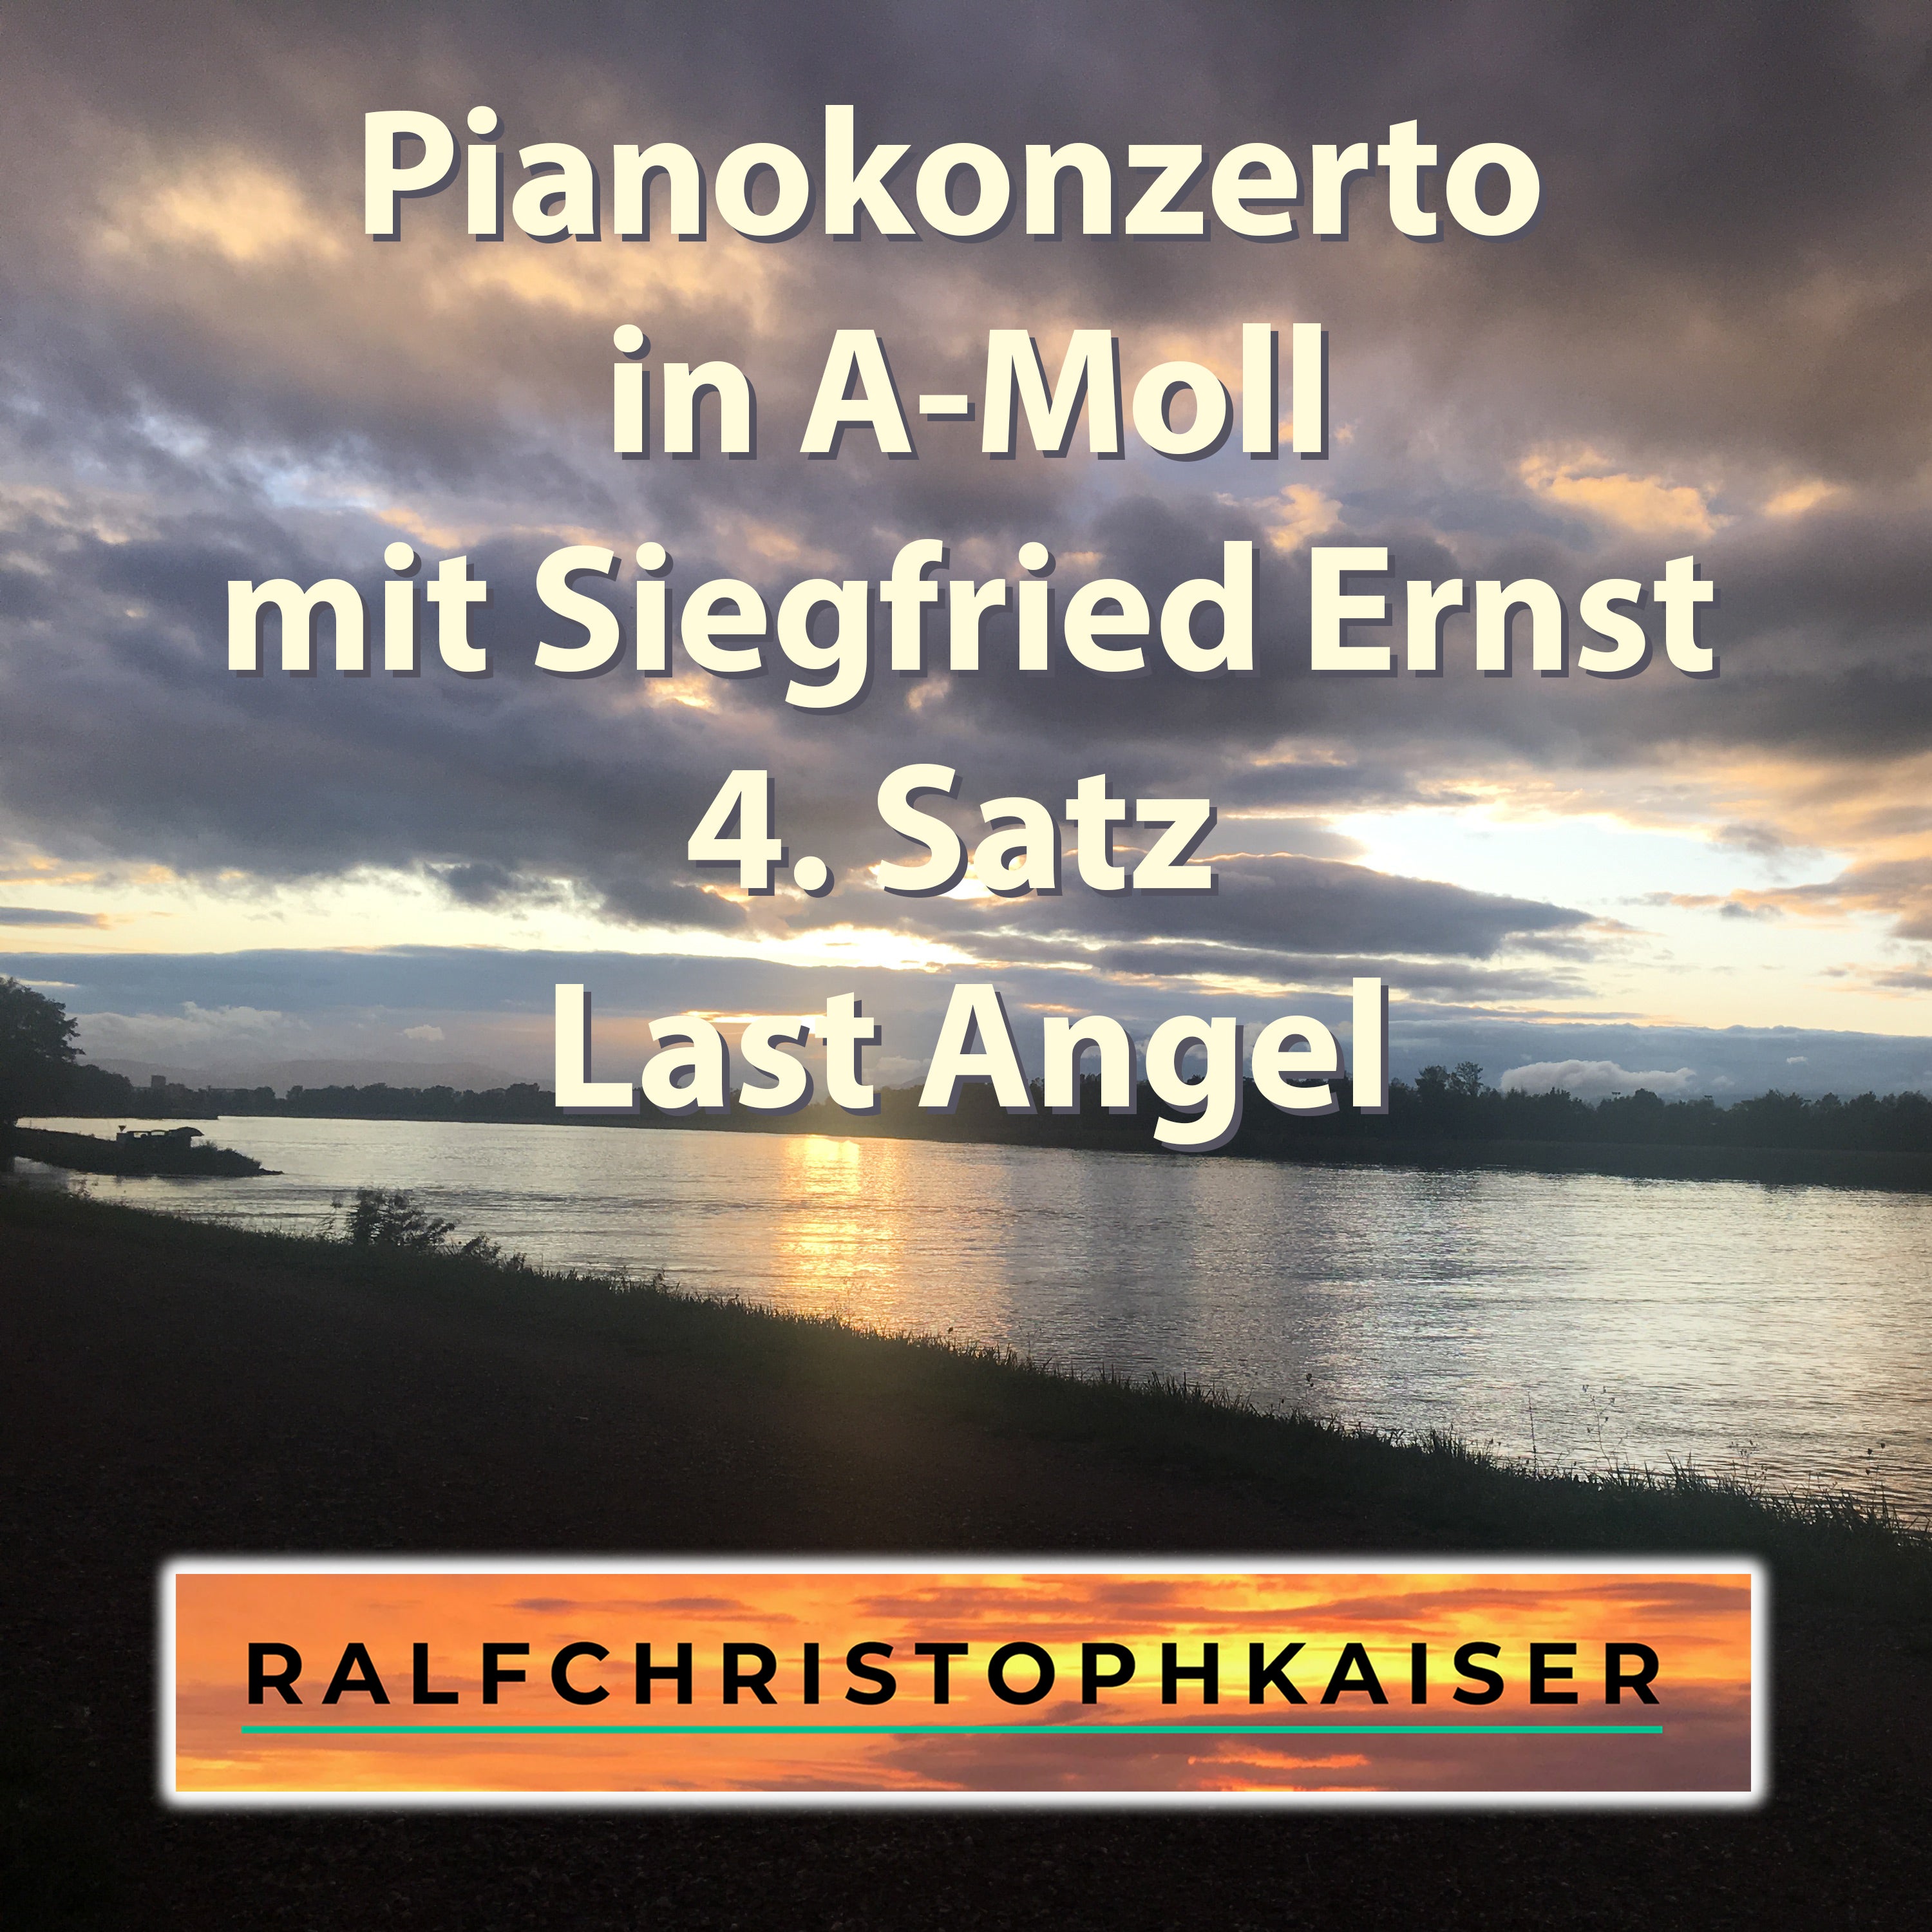 Pianokonzerto in a-minor part 4 Last Angel by Siegfried ernst with Orchestra by Ralf Christoph kaiser Full Score Full Orchestra Leadsheet and Parts and Full HD Sound wav Files - ralfchristophkaiser.com Musik und Noten